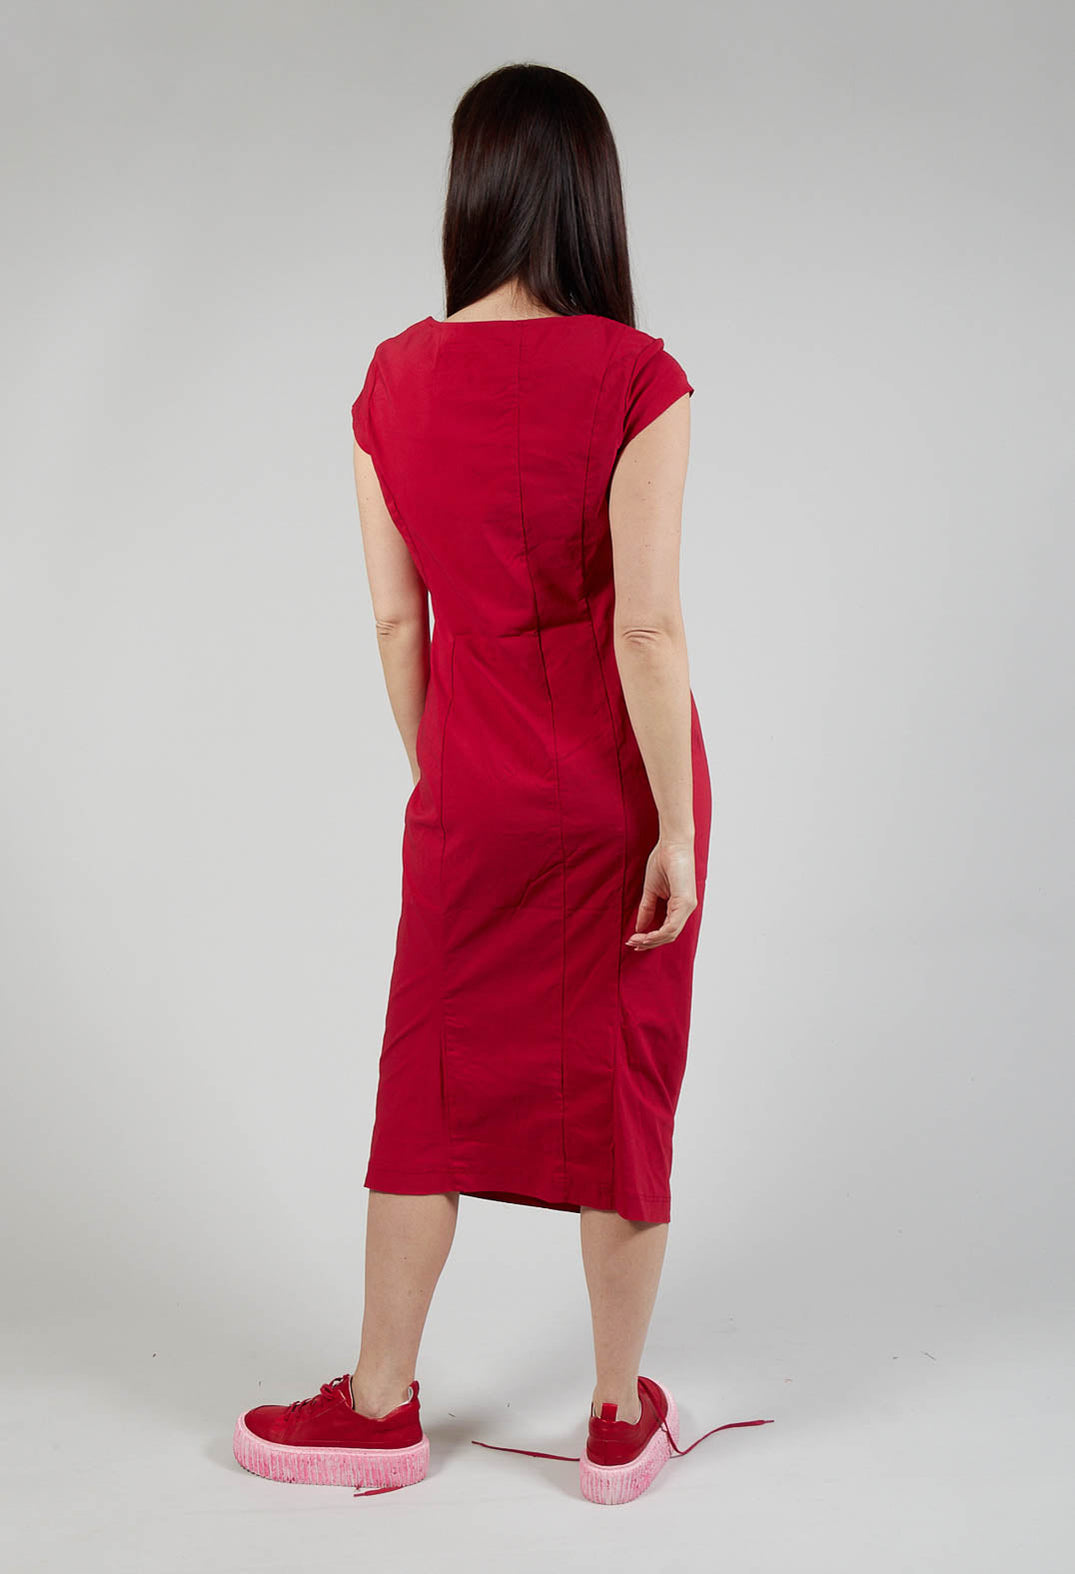 Capped Sleeve Slim Fit Dress in Chili